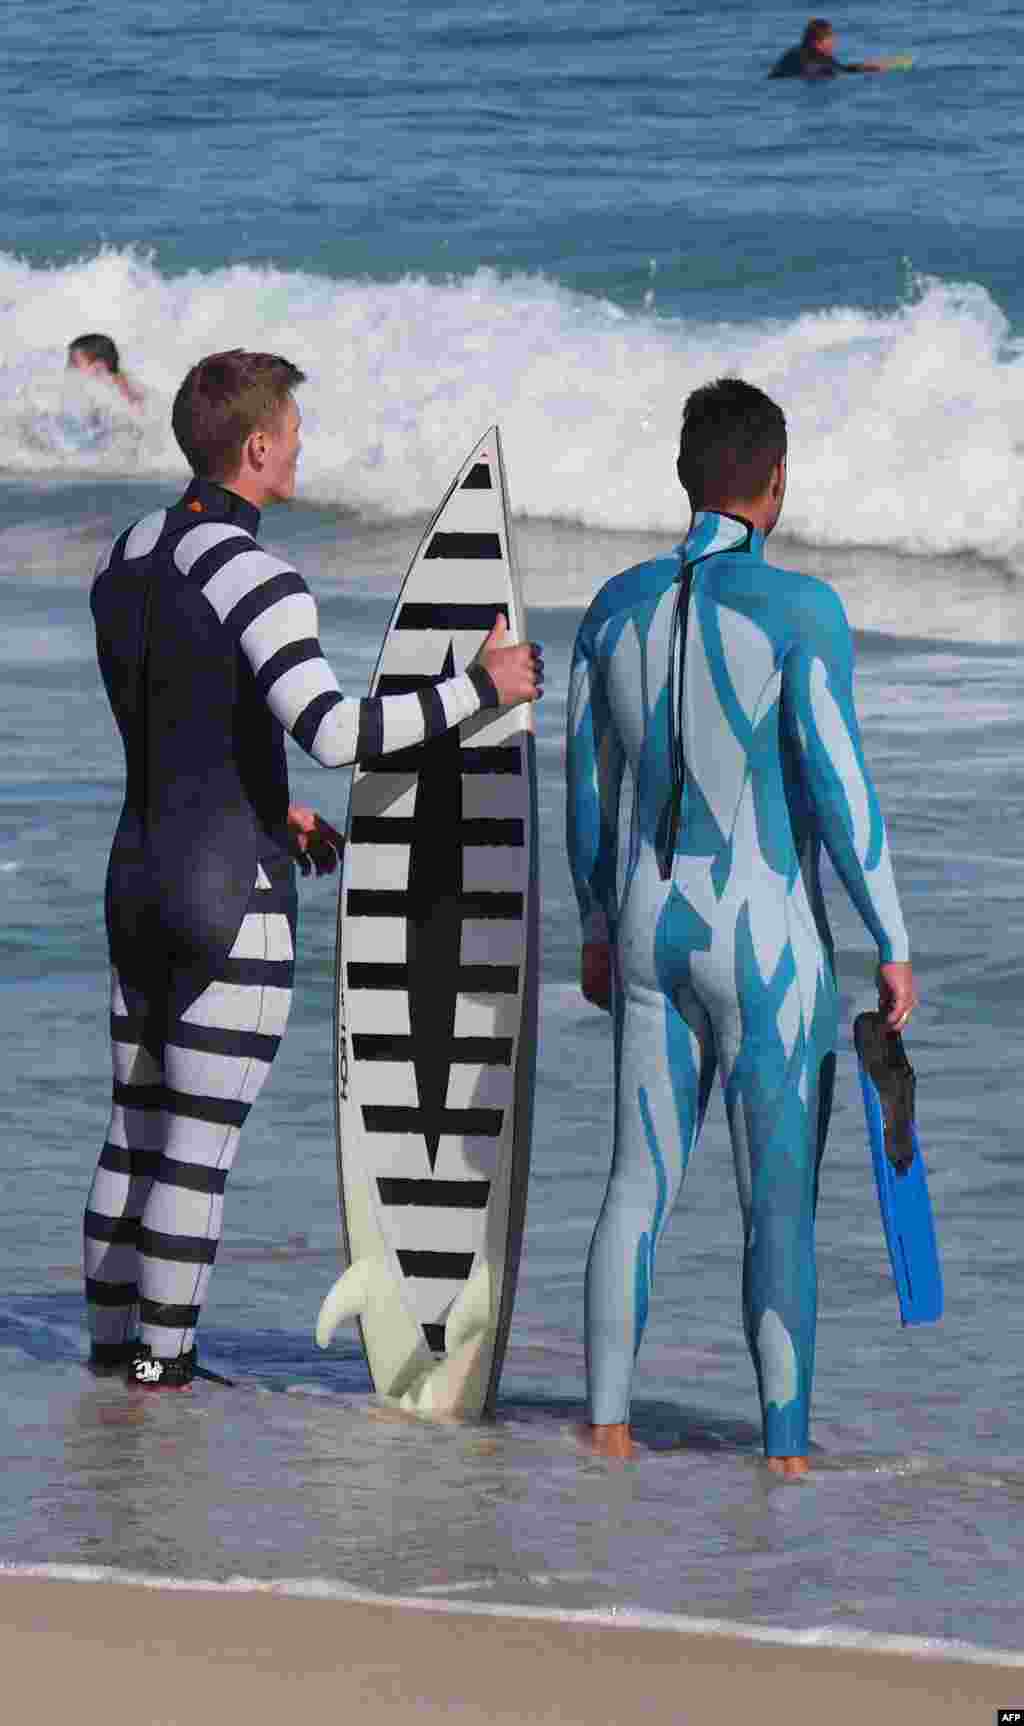 A surfer (L) and a diver (R) wearing wetsuits displaying the two styles of Shark Attack Mitigation Systems (SAMS) shark deterrent technology, with the surfer holding a surfboard also showing the new design. The new technology was designed by SAMS in collaboration with the Oceans Institute at the University of Western Australia, with the two design variations either presenting the wearer as potentially dangerous and unpalatable to a shark, or making it very difficult for the shark to see the wearer in the water. (Shark Attack Mitigation Systems handout photo)